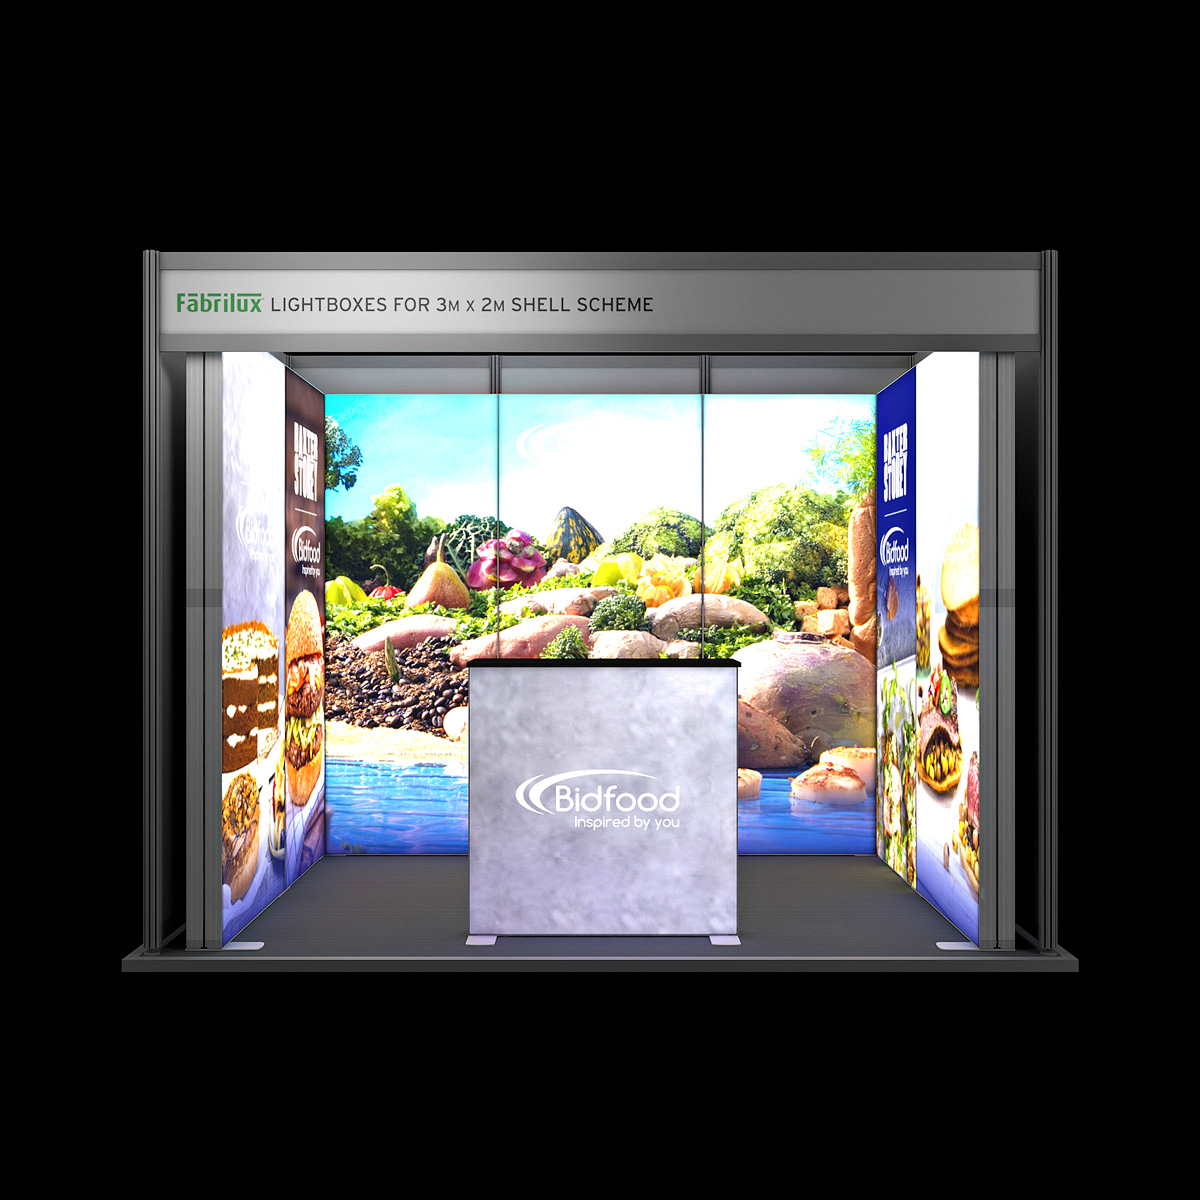 3m x 2m FABRILUX® LED Lightbox Exhibition Stand U-Shaped Shell Scheme